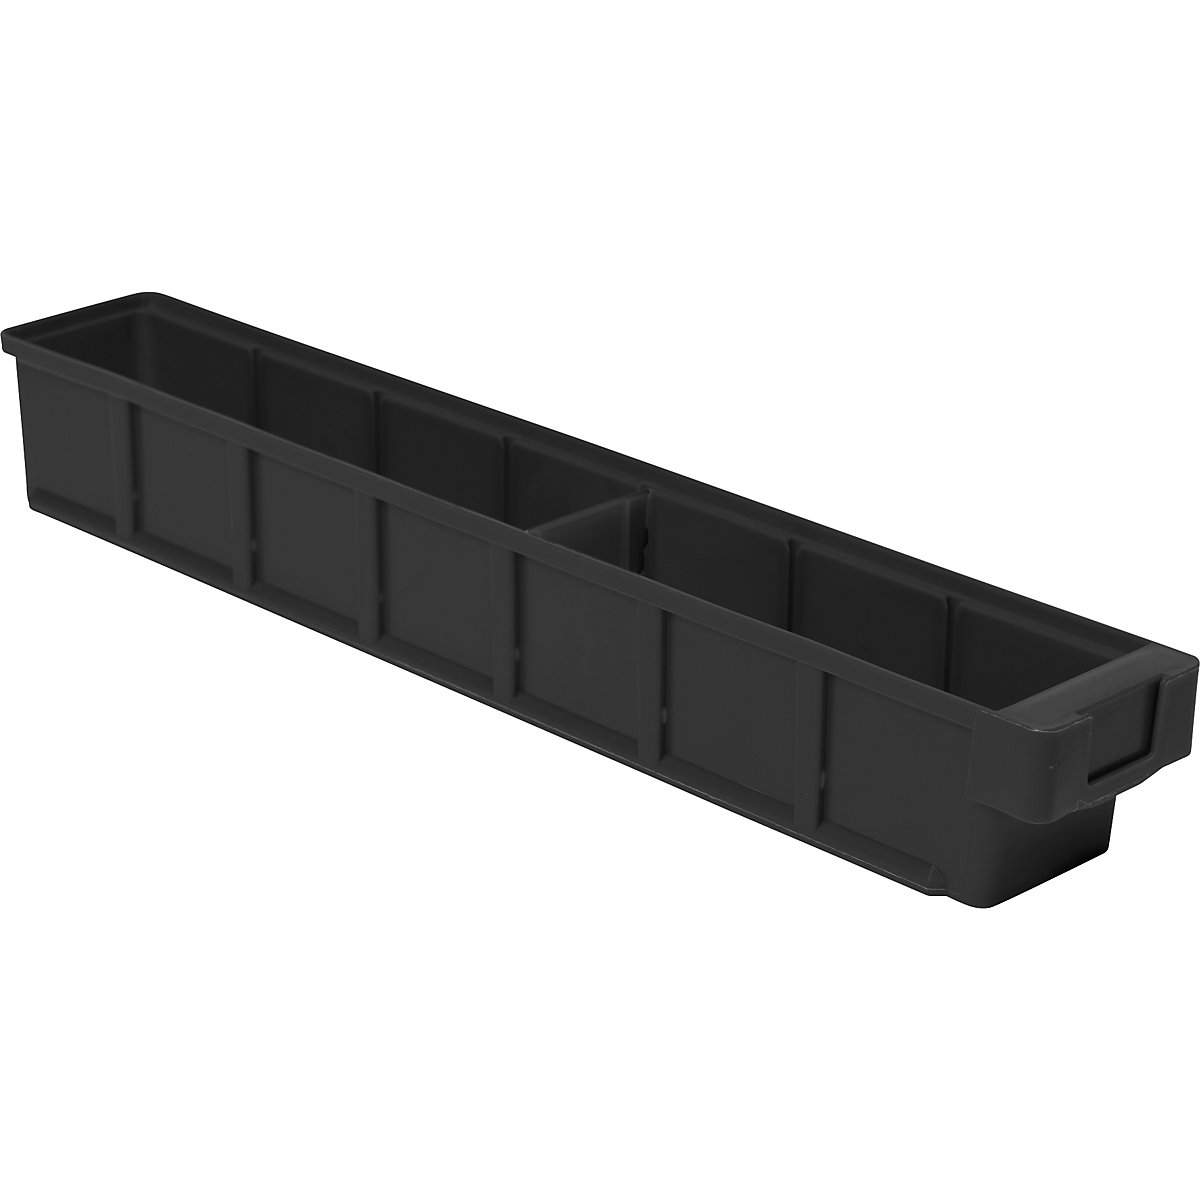 ESD small parts box, made of polypropylene, LxWxH 600 x 93 x 83 mm, pack of 16-5